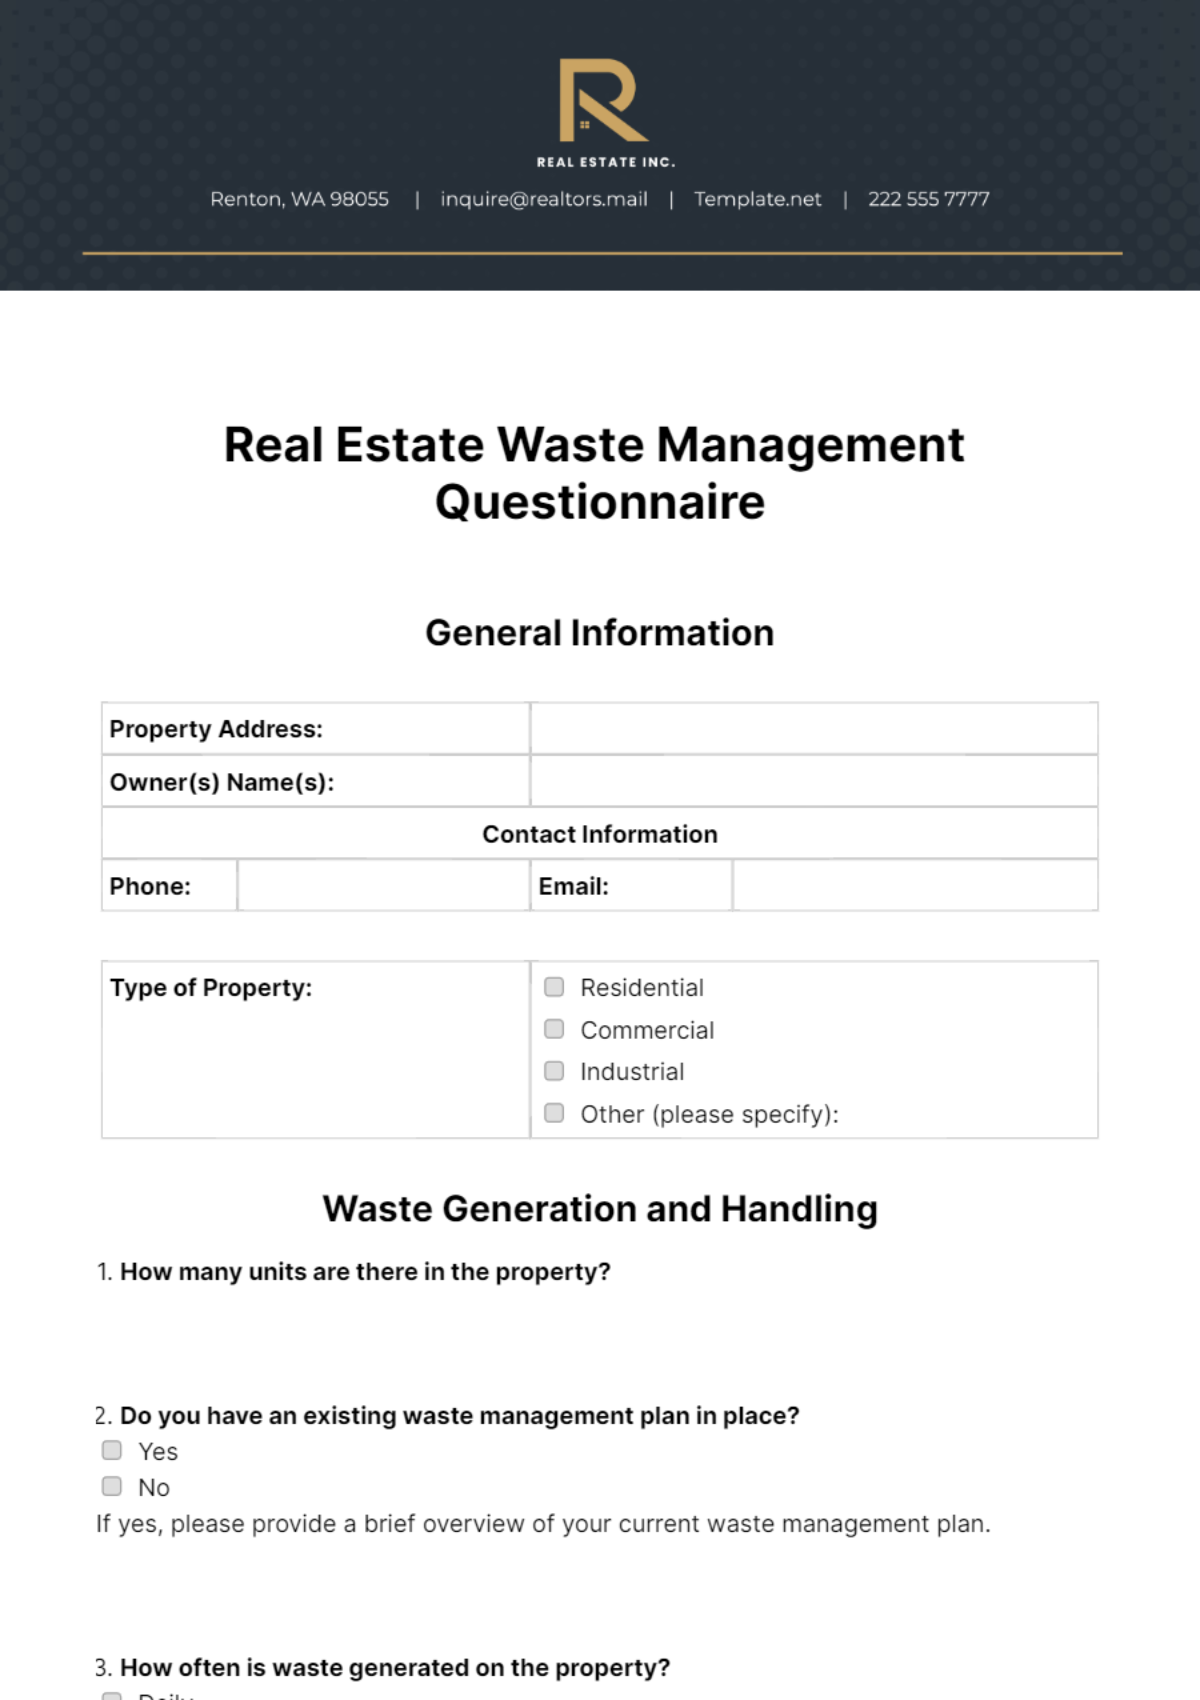 Real Estate Waste Management Questionnaire Template